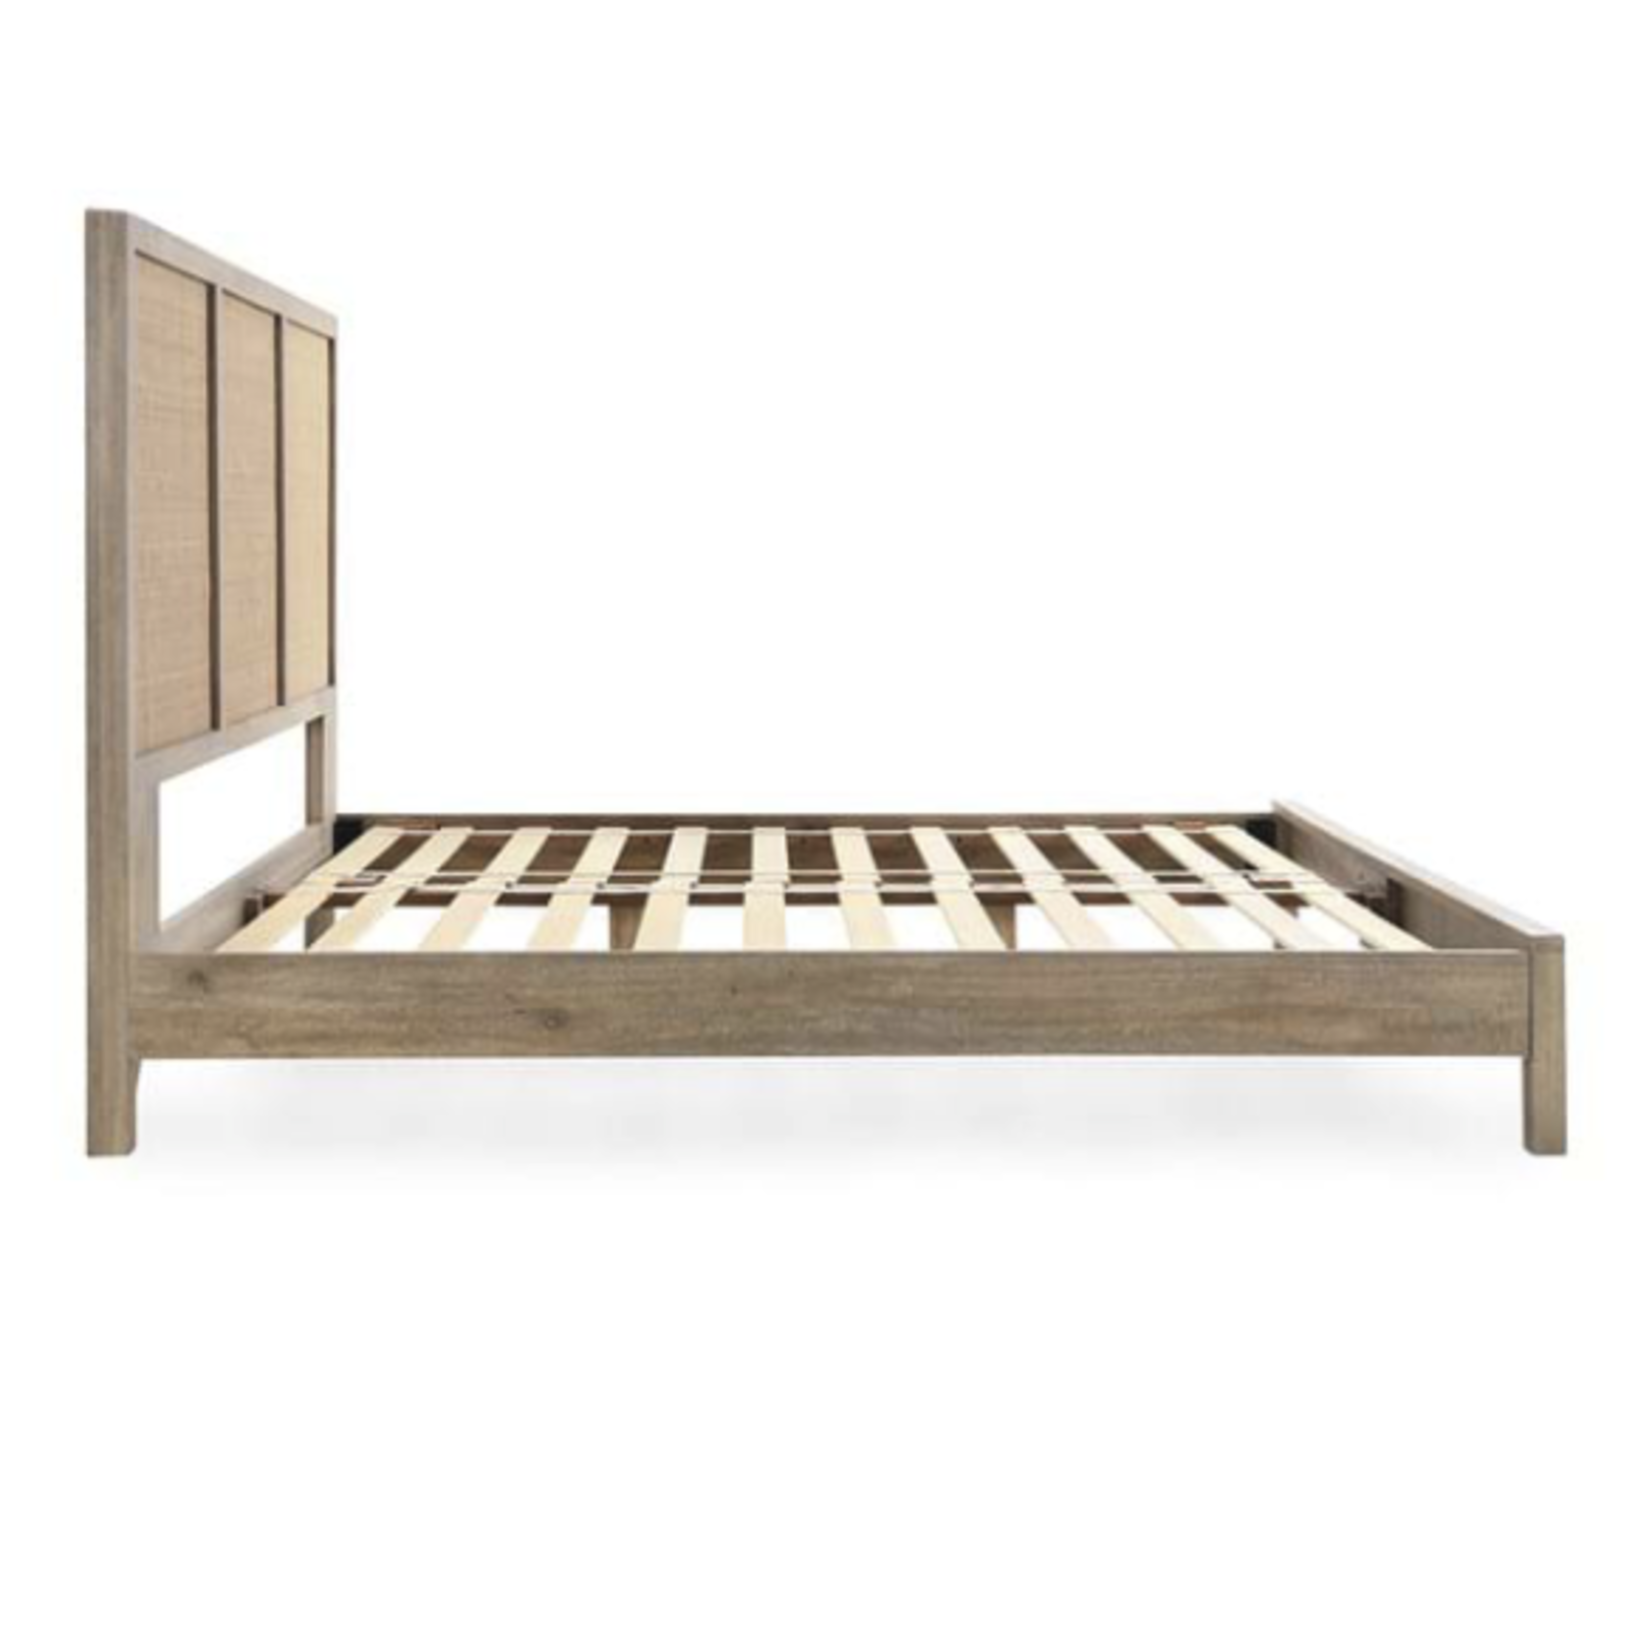 Outside The Box 80x85x54 Jensen Taupe Mango Wood & Cane Eastern King Bed